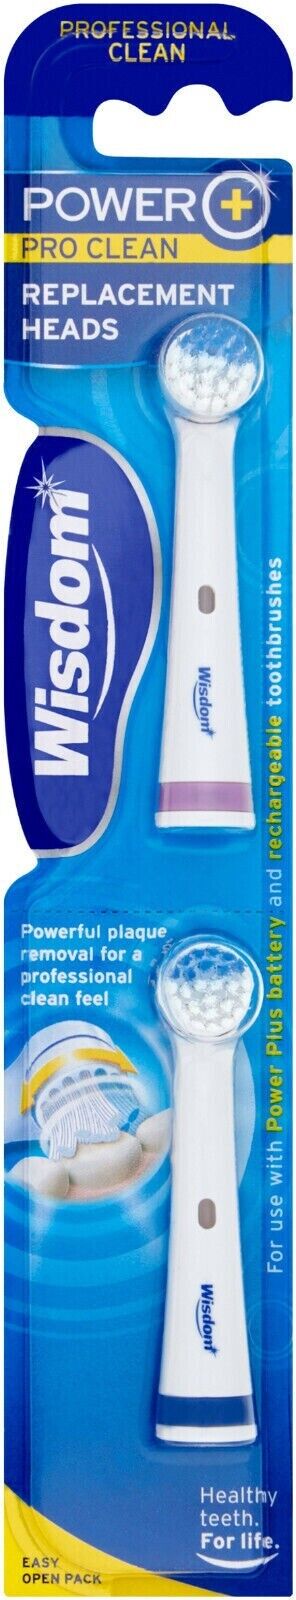 Wisdom Power Plus Electric Toothbrush Replacement Heads